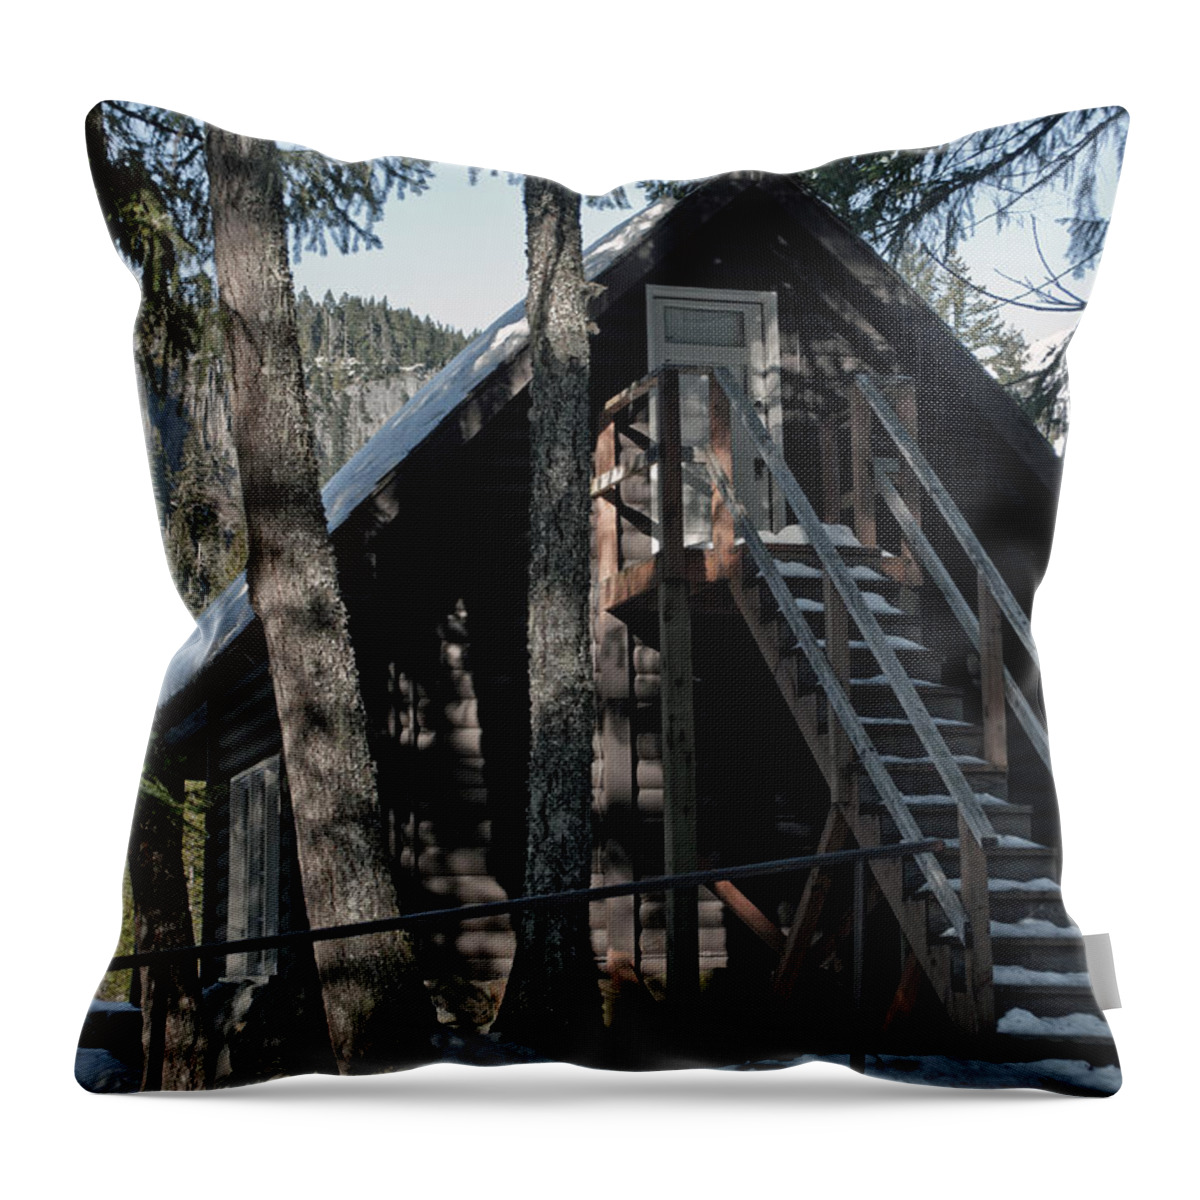 Nature Throw Pillow featuring the photograph Cabin Get Away by Tikvah's Hope